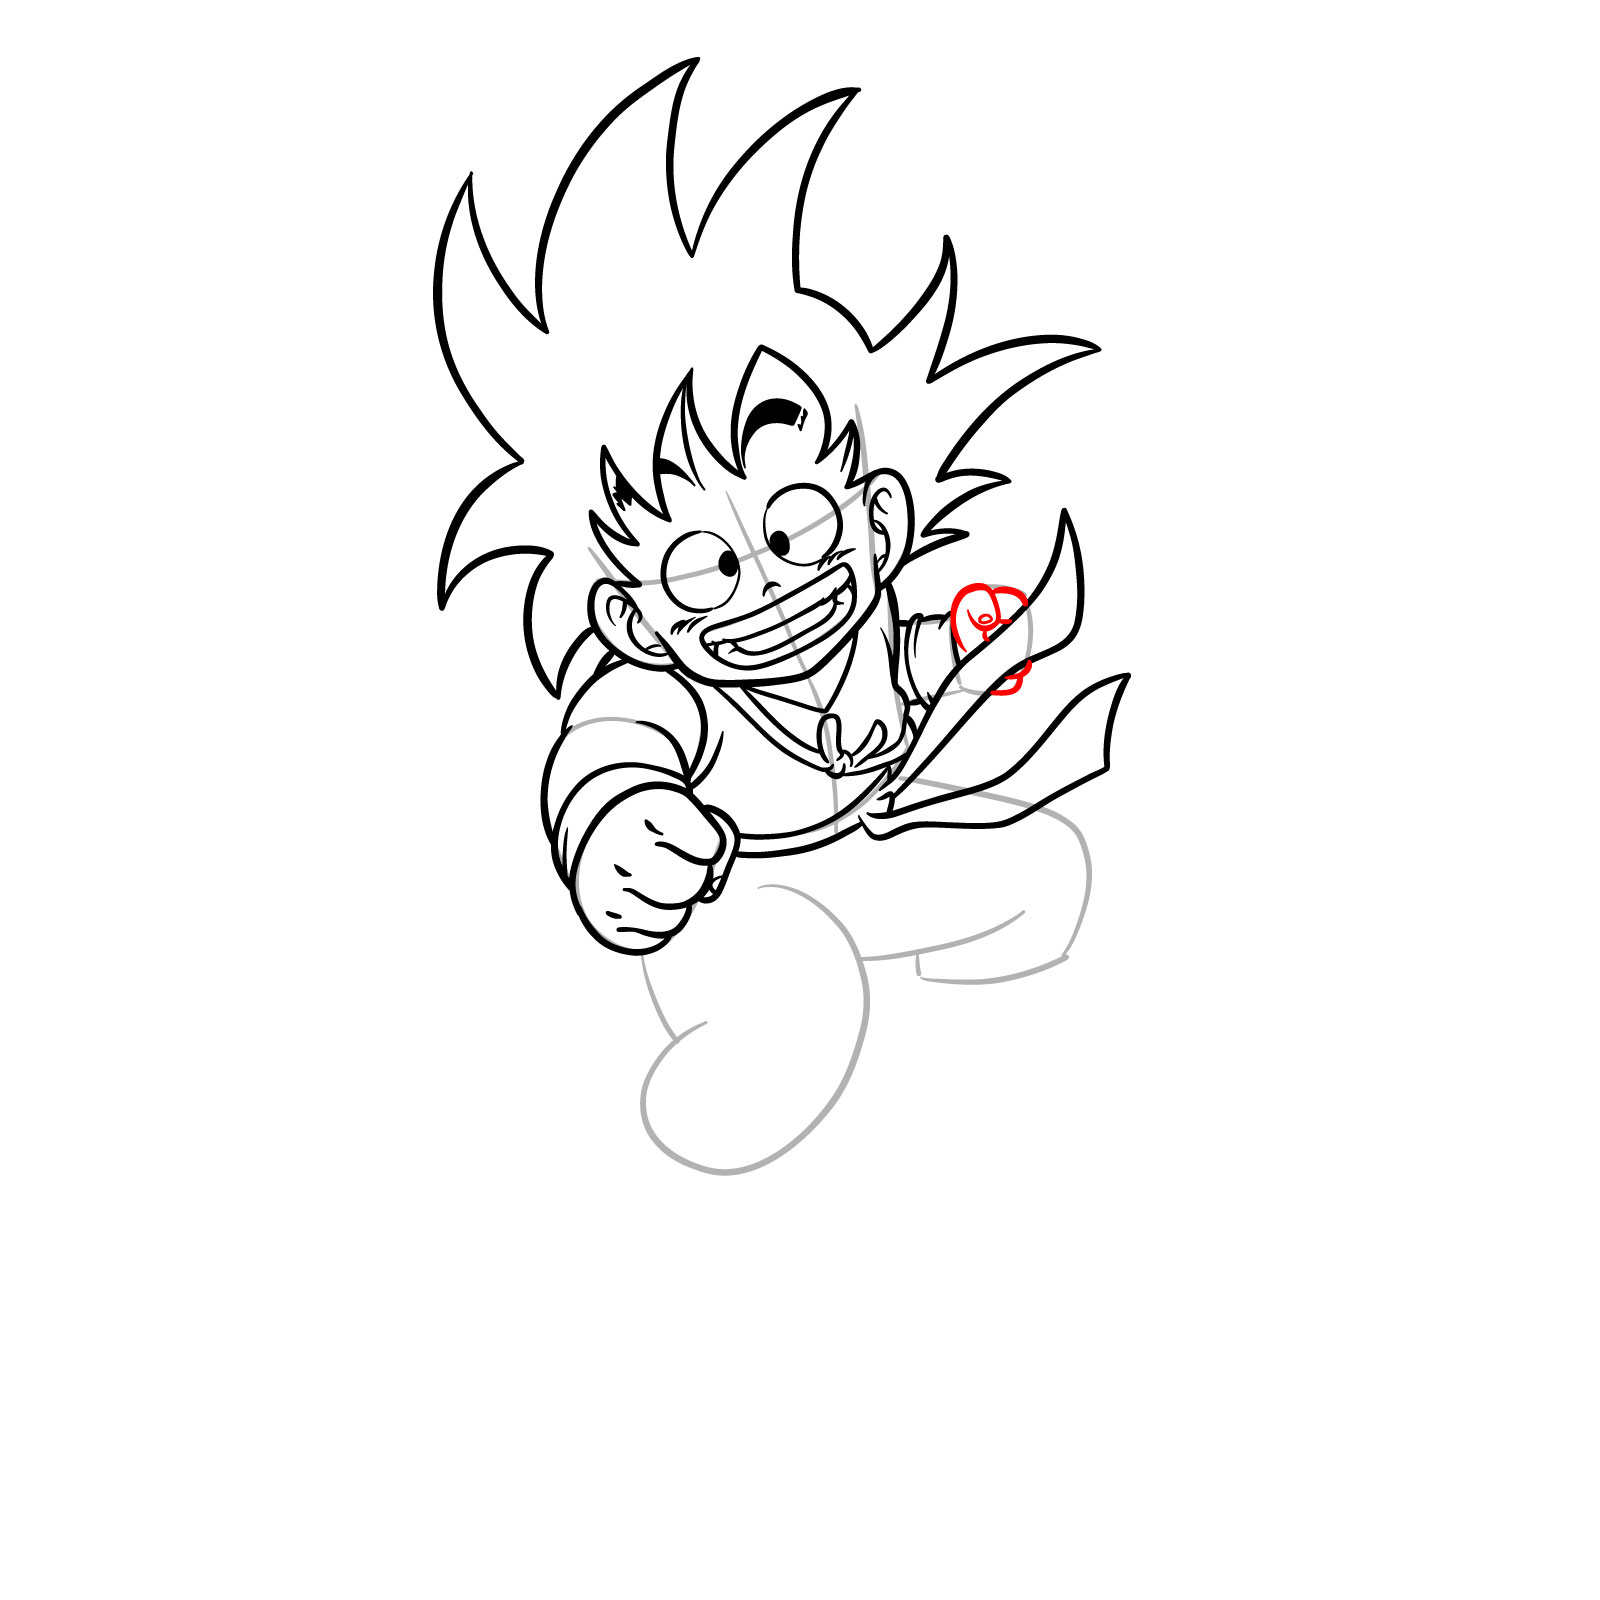 How to draw Kid Goku riding on the Flying Nimbus - step 18